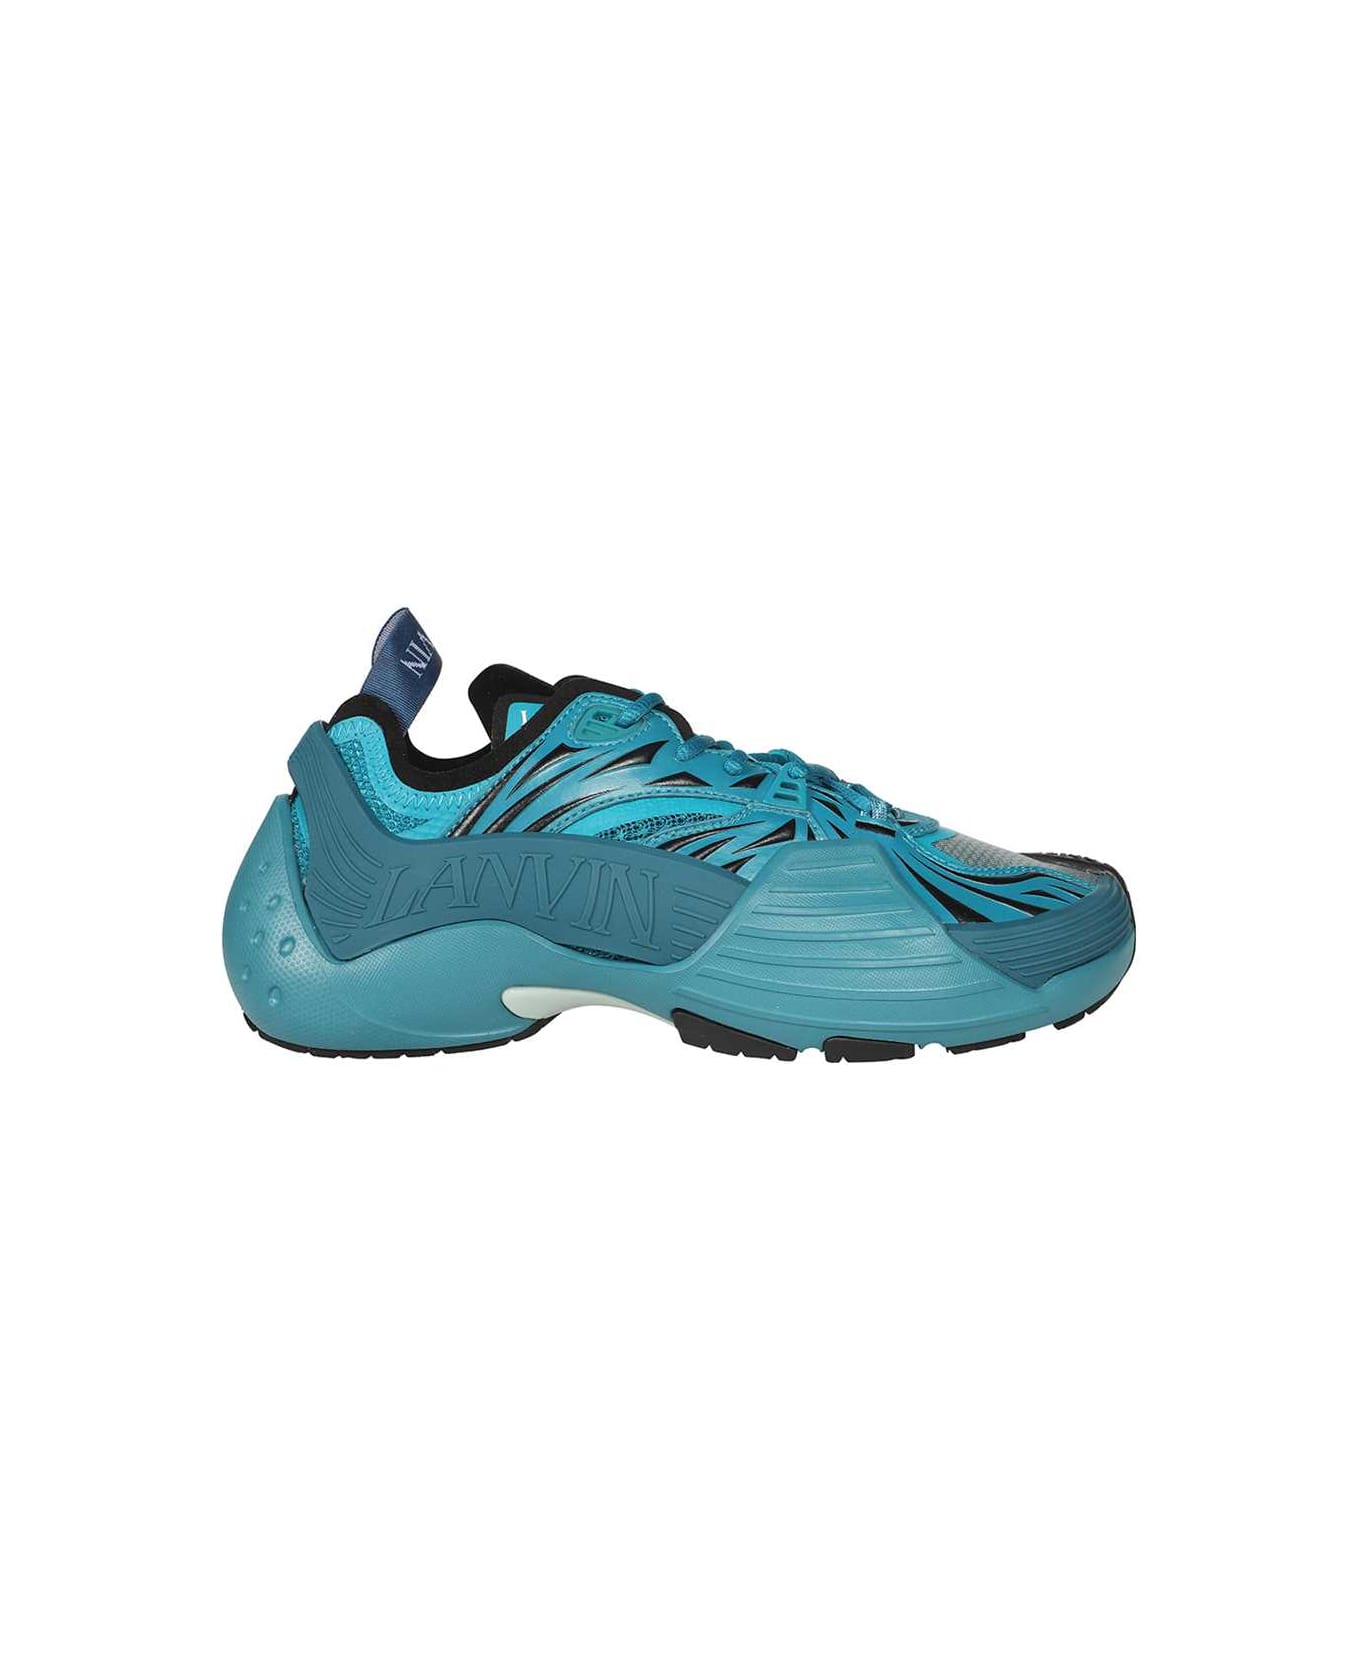 Lanvin Low-top Sneakers - turquoise